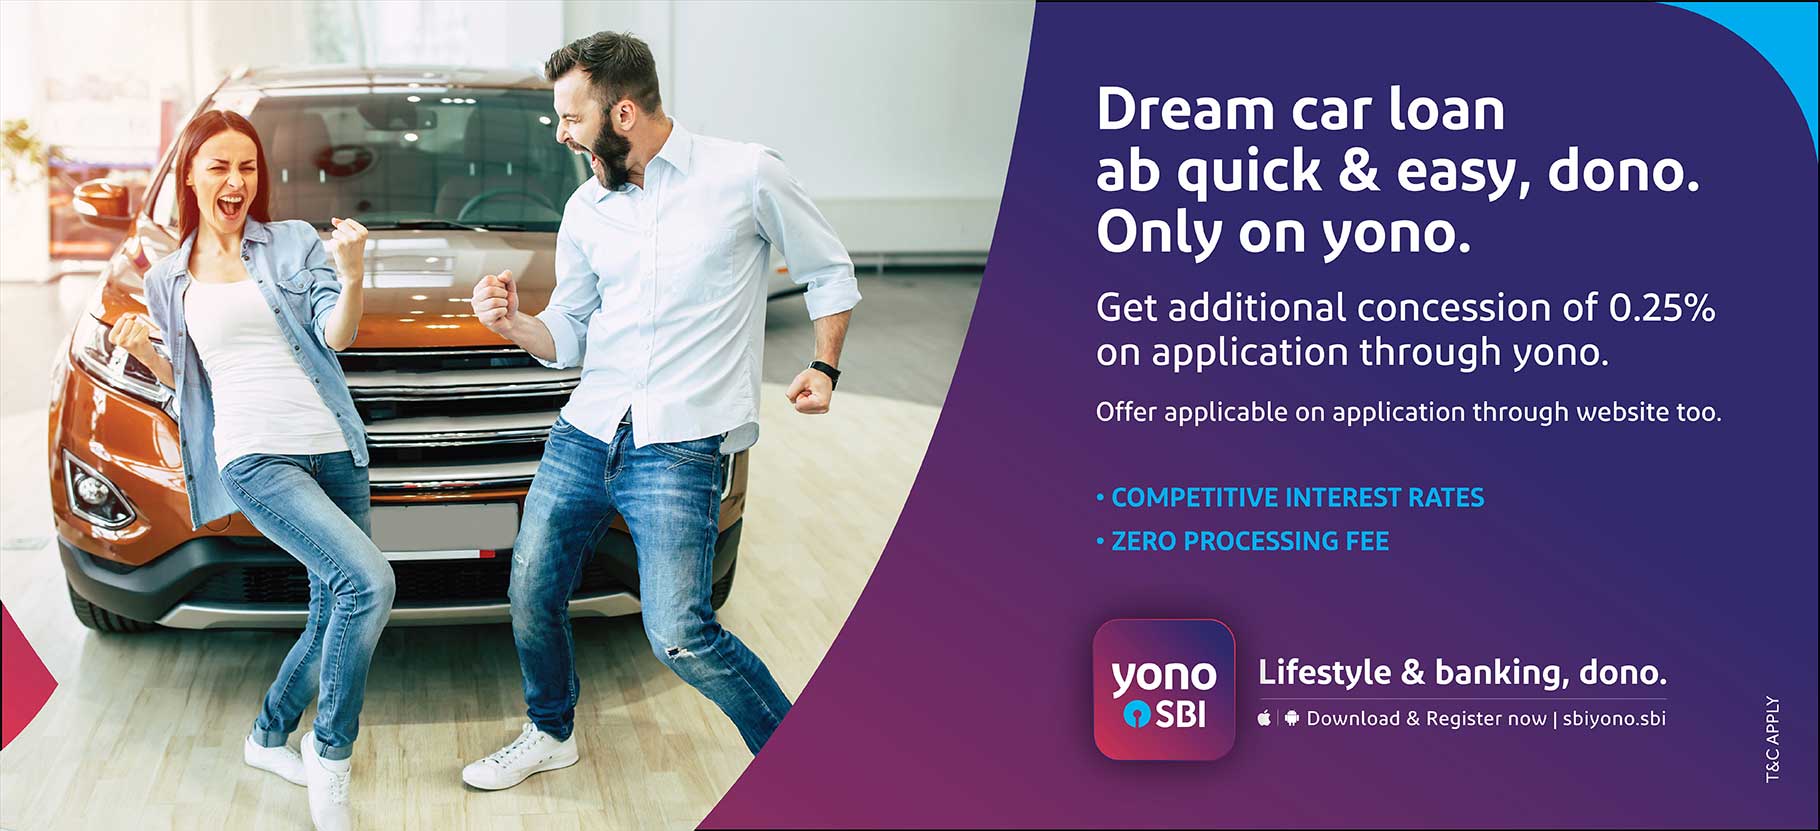 Dream Card loan ab quick and easy dono only on yono